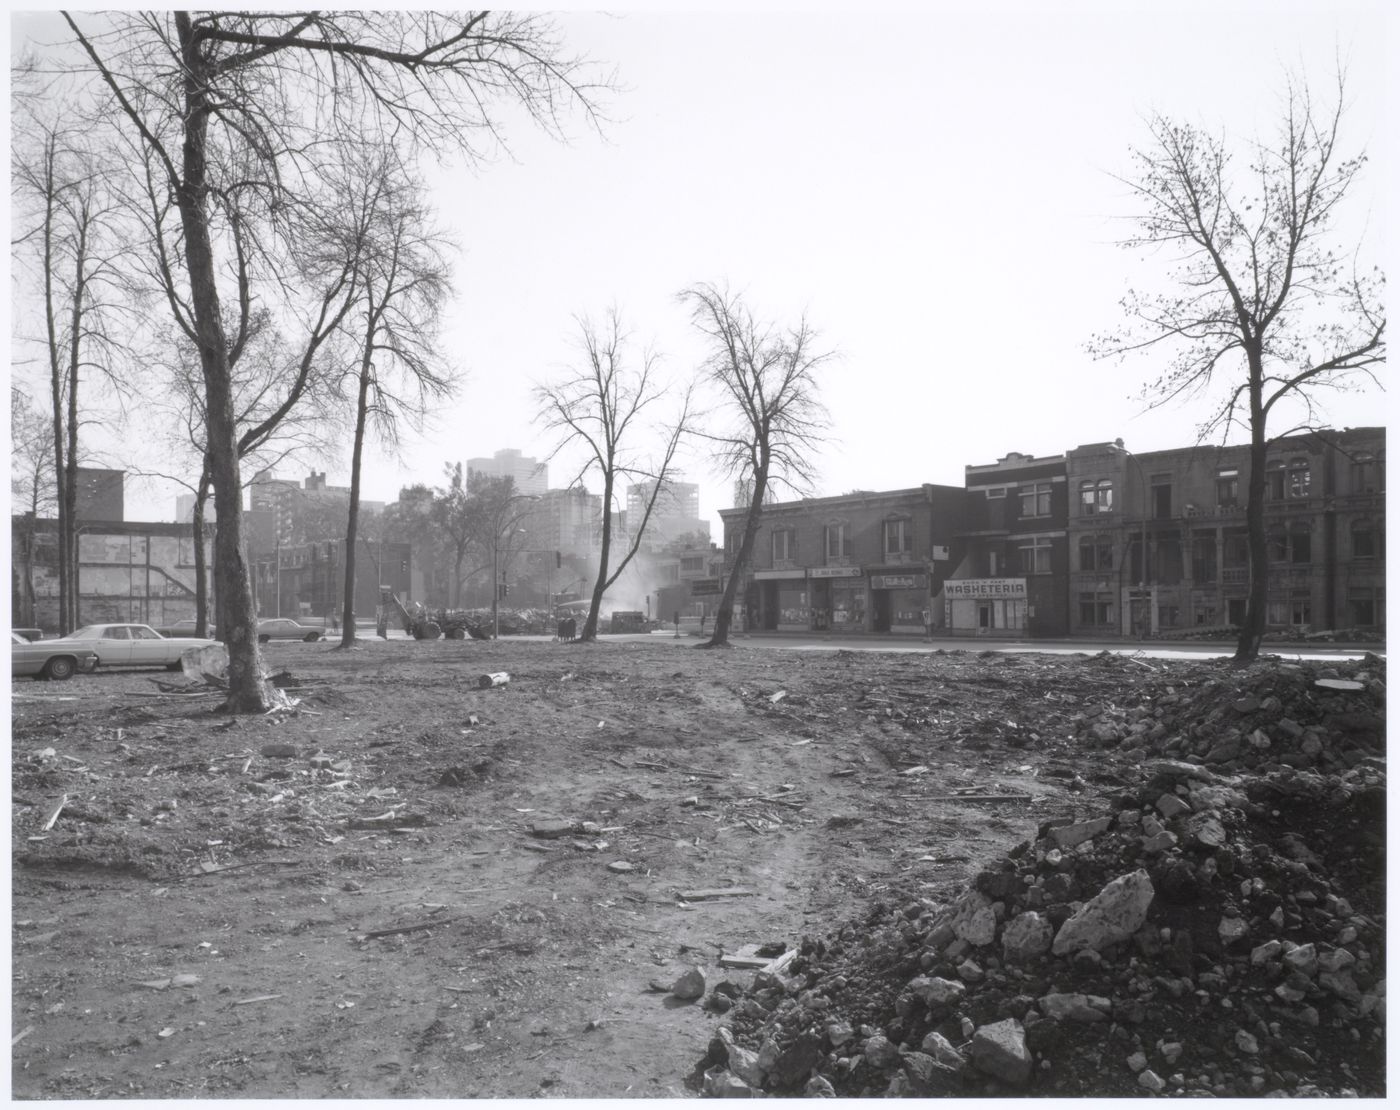 View of the Milton-Parc neighbourhood showing an empty lot in the foreground and the demolition of a building in the background, corner of avenue du Parc and rue Prince-Arthur, Montréal, Québec